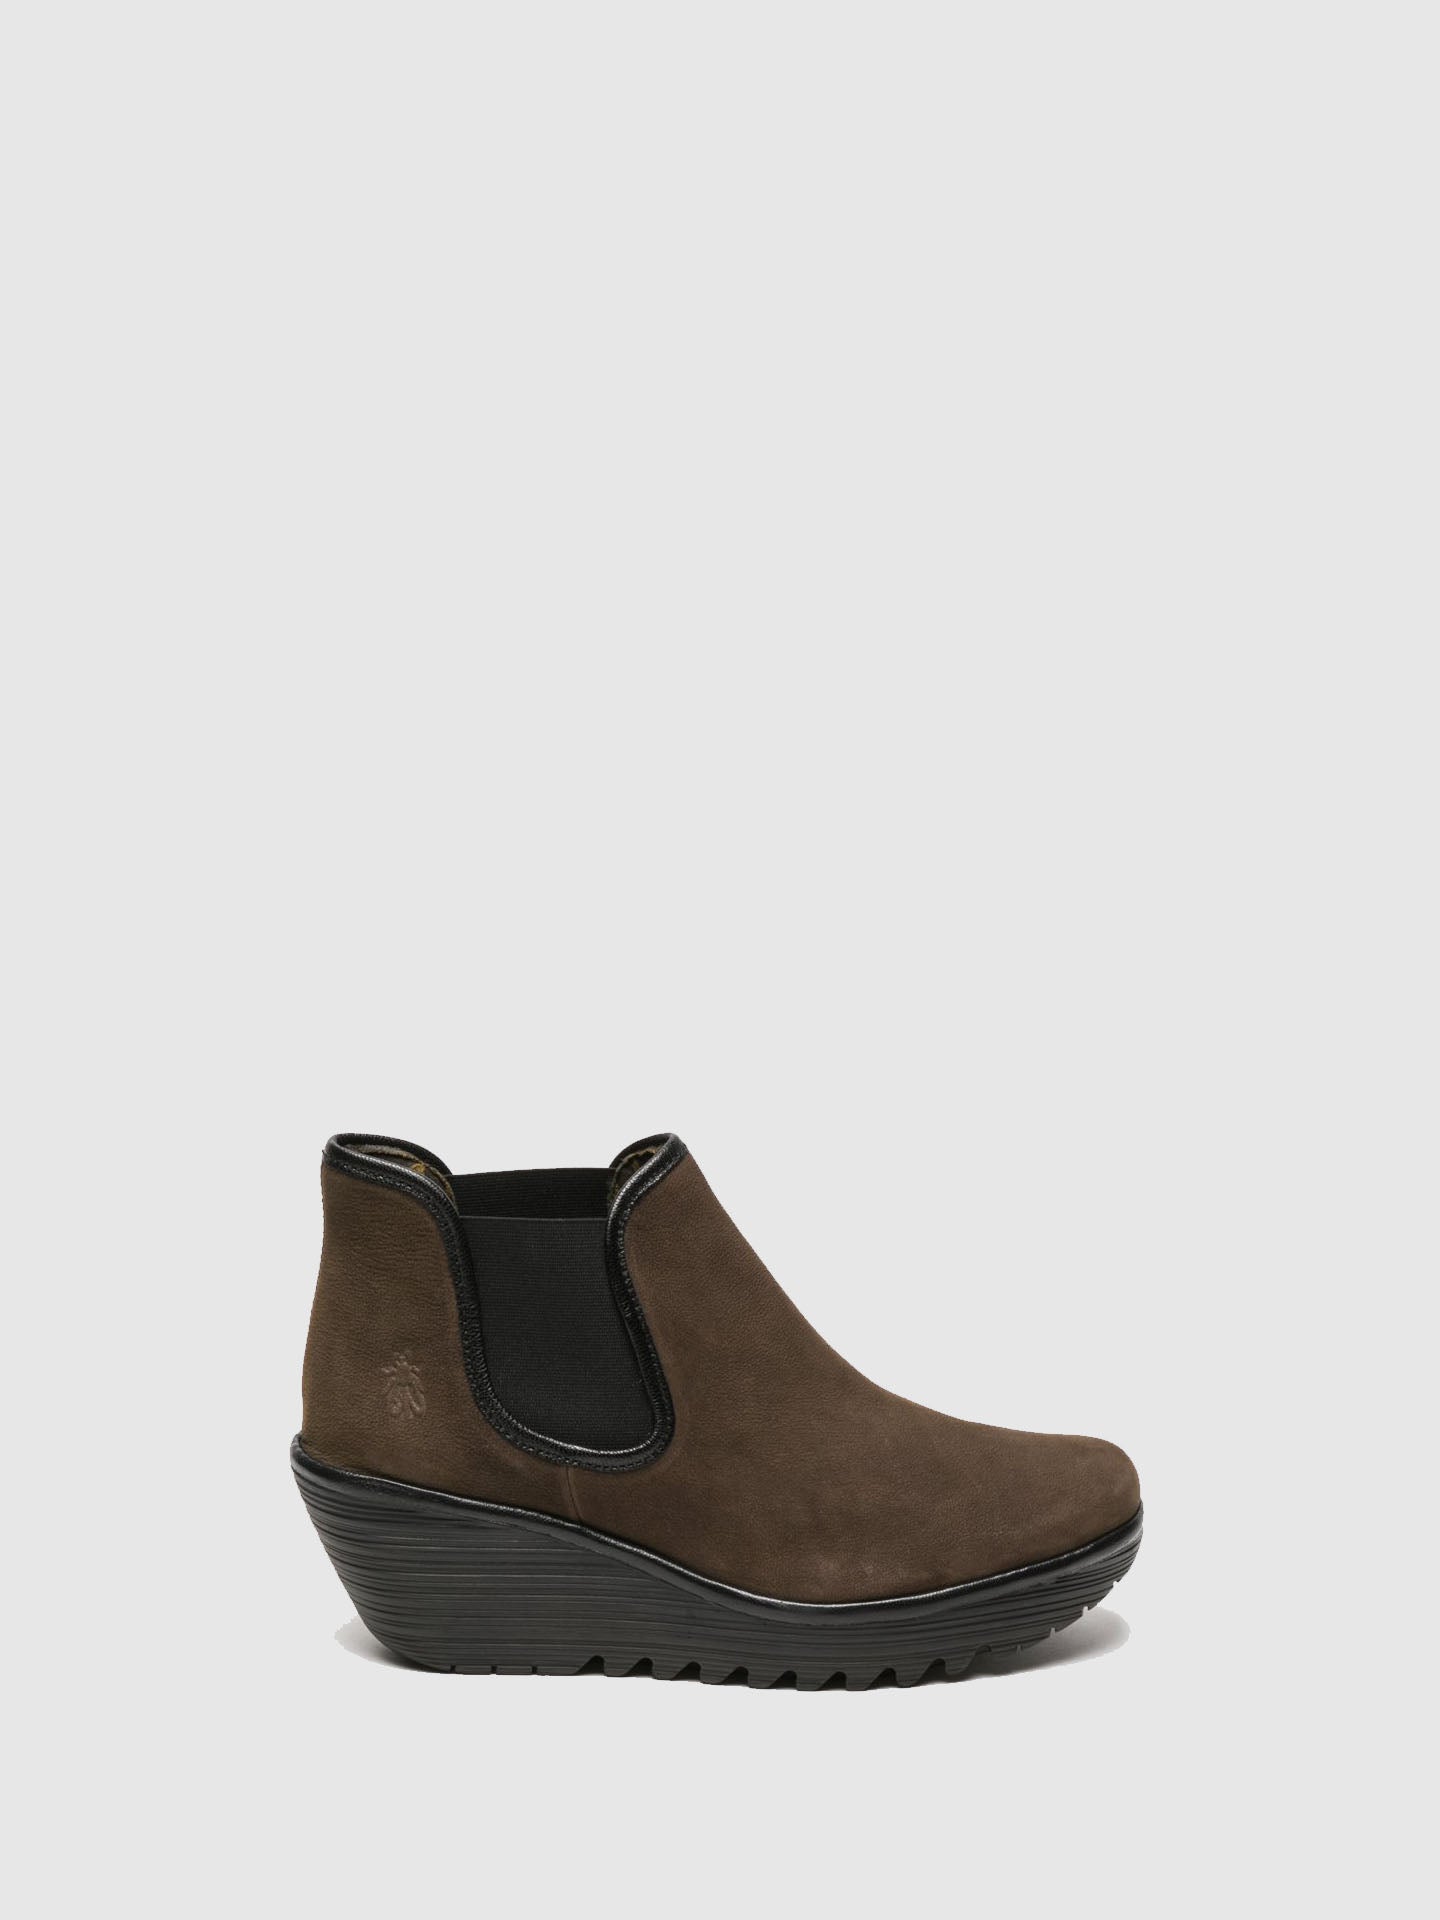 Fly London SaddleBrown Wedge Ankle Boots